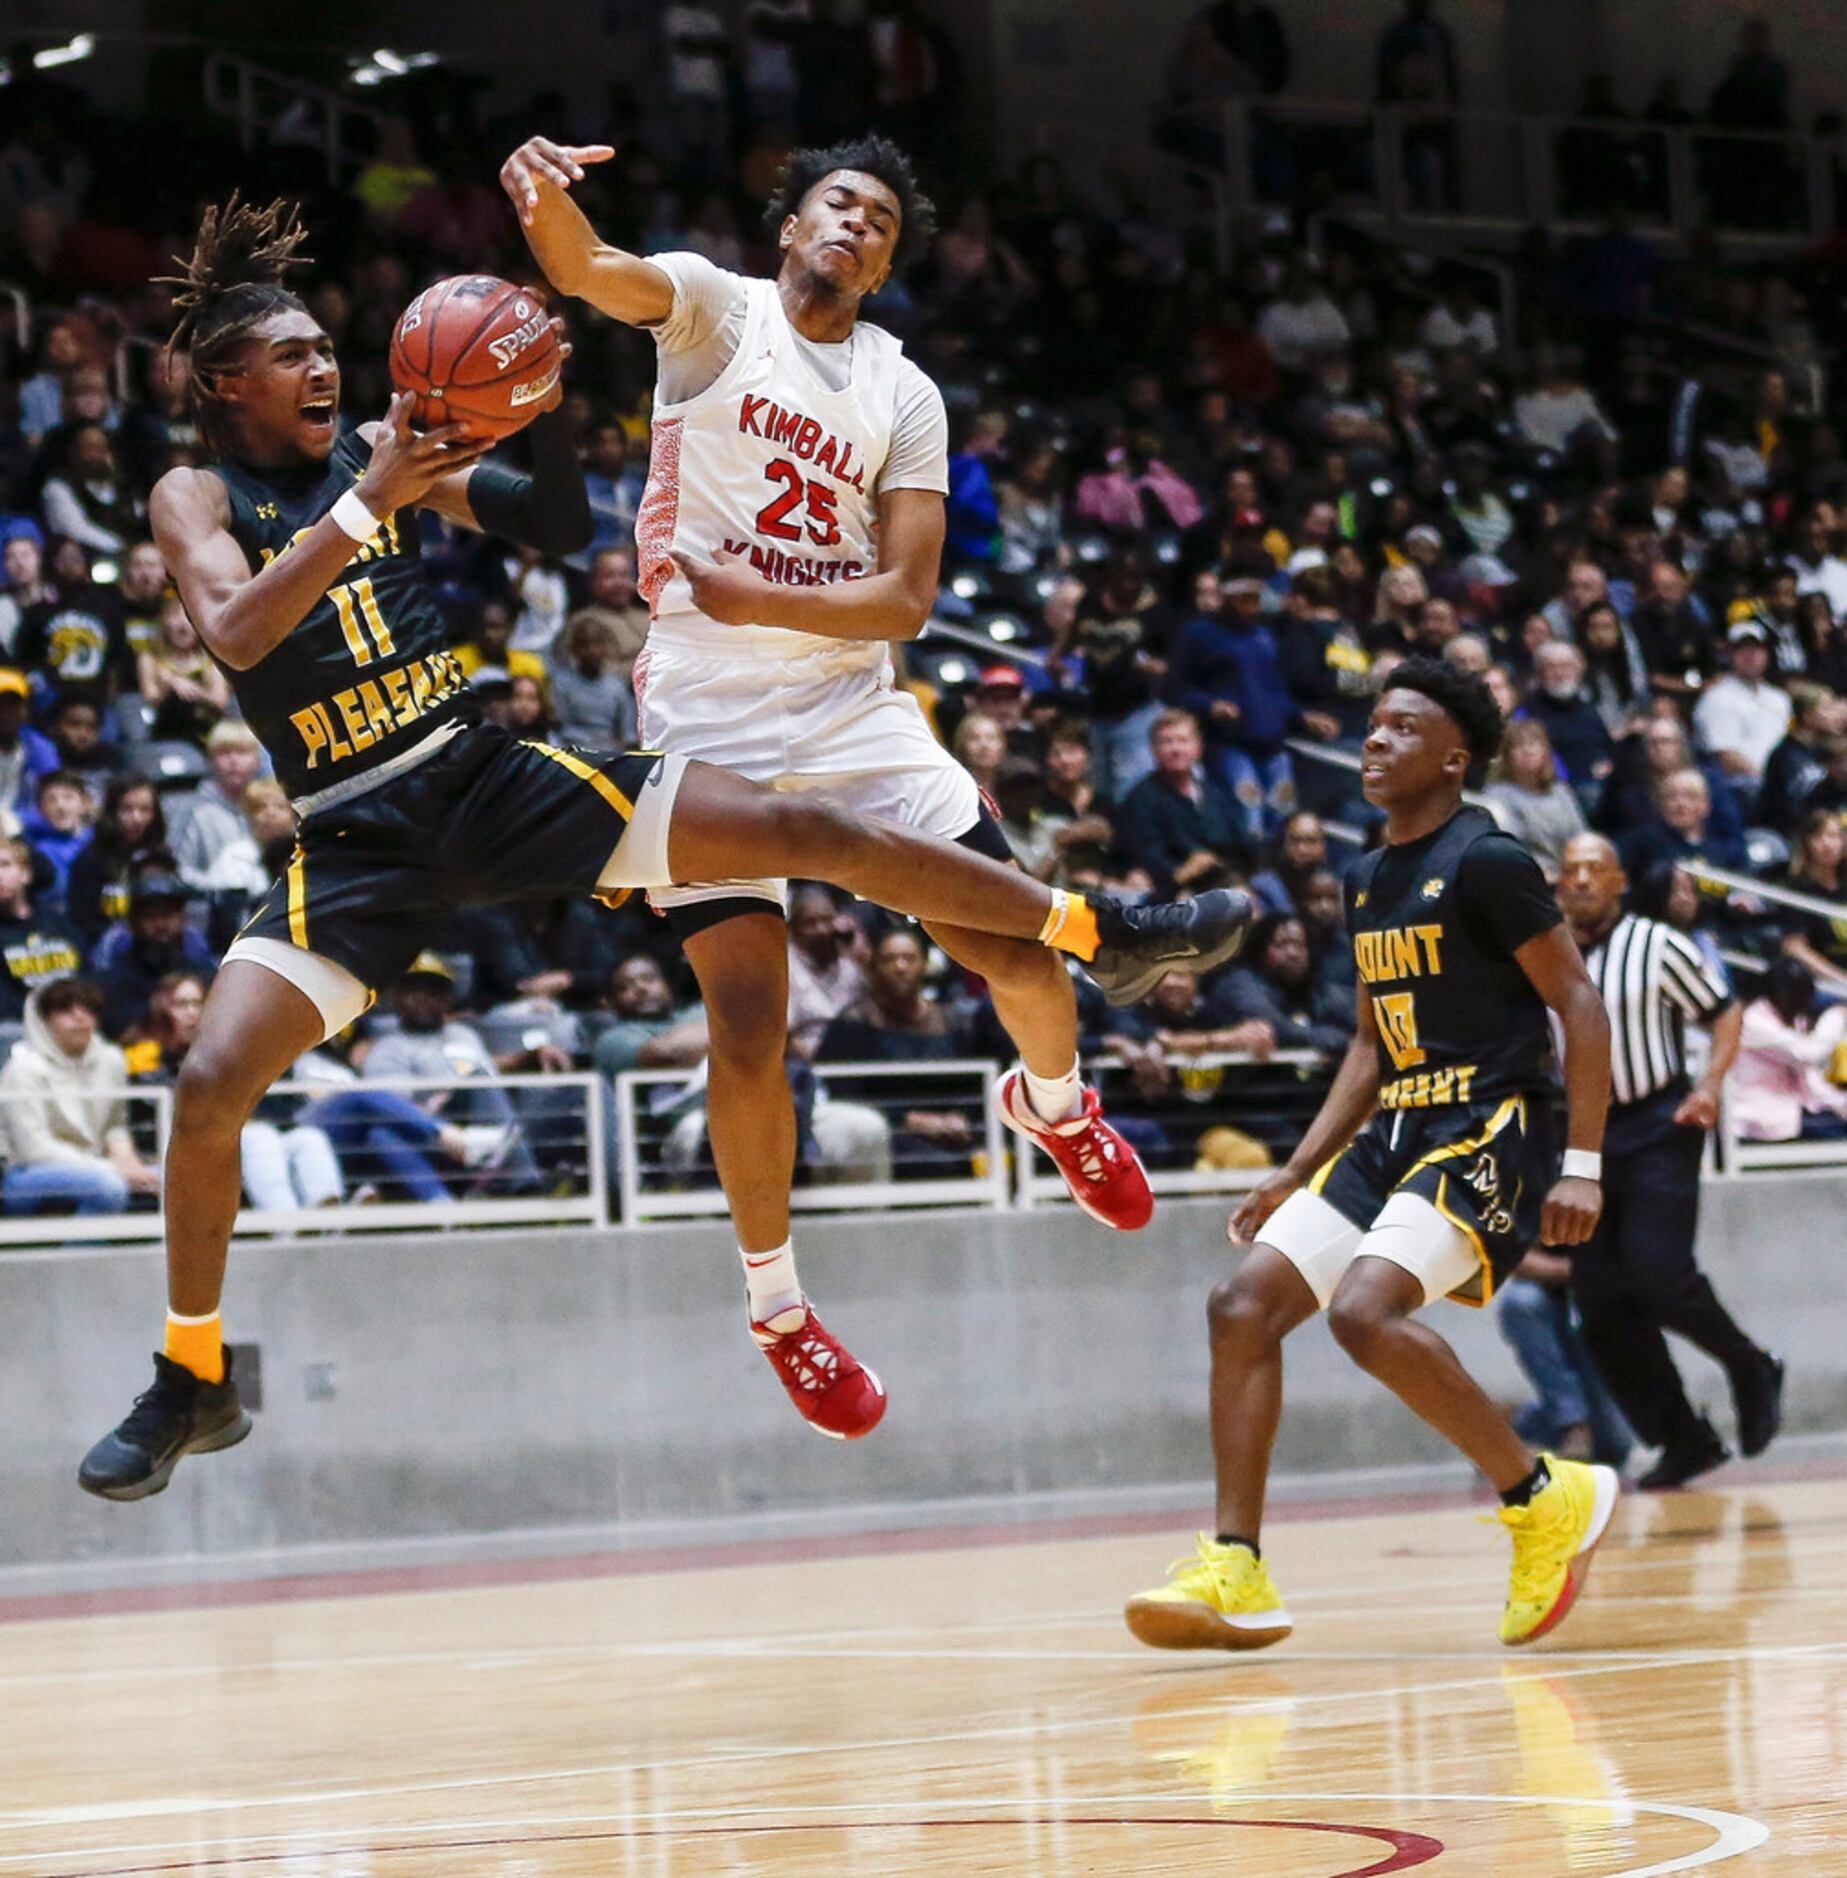 Mount Pleasant's Jamarion Brown (11) makes a rebound past Kimball's Marcus Bonner (25)...